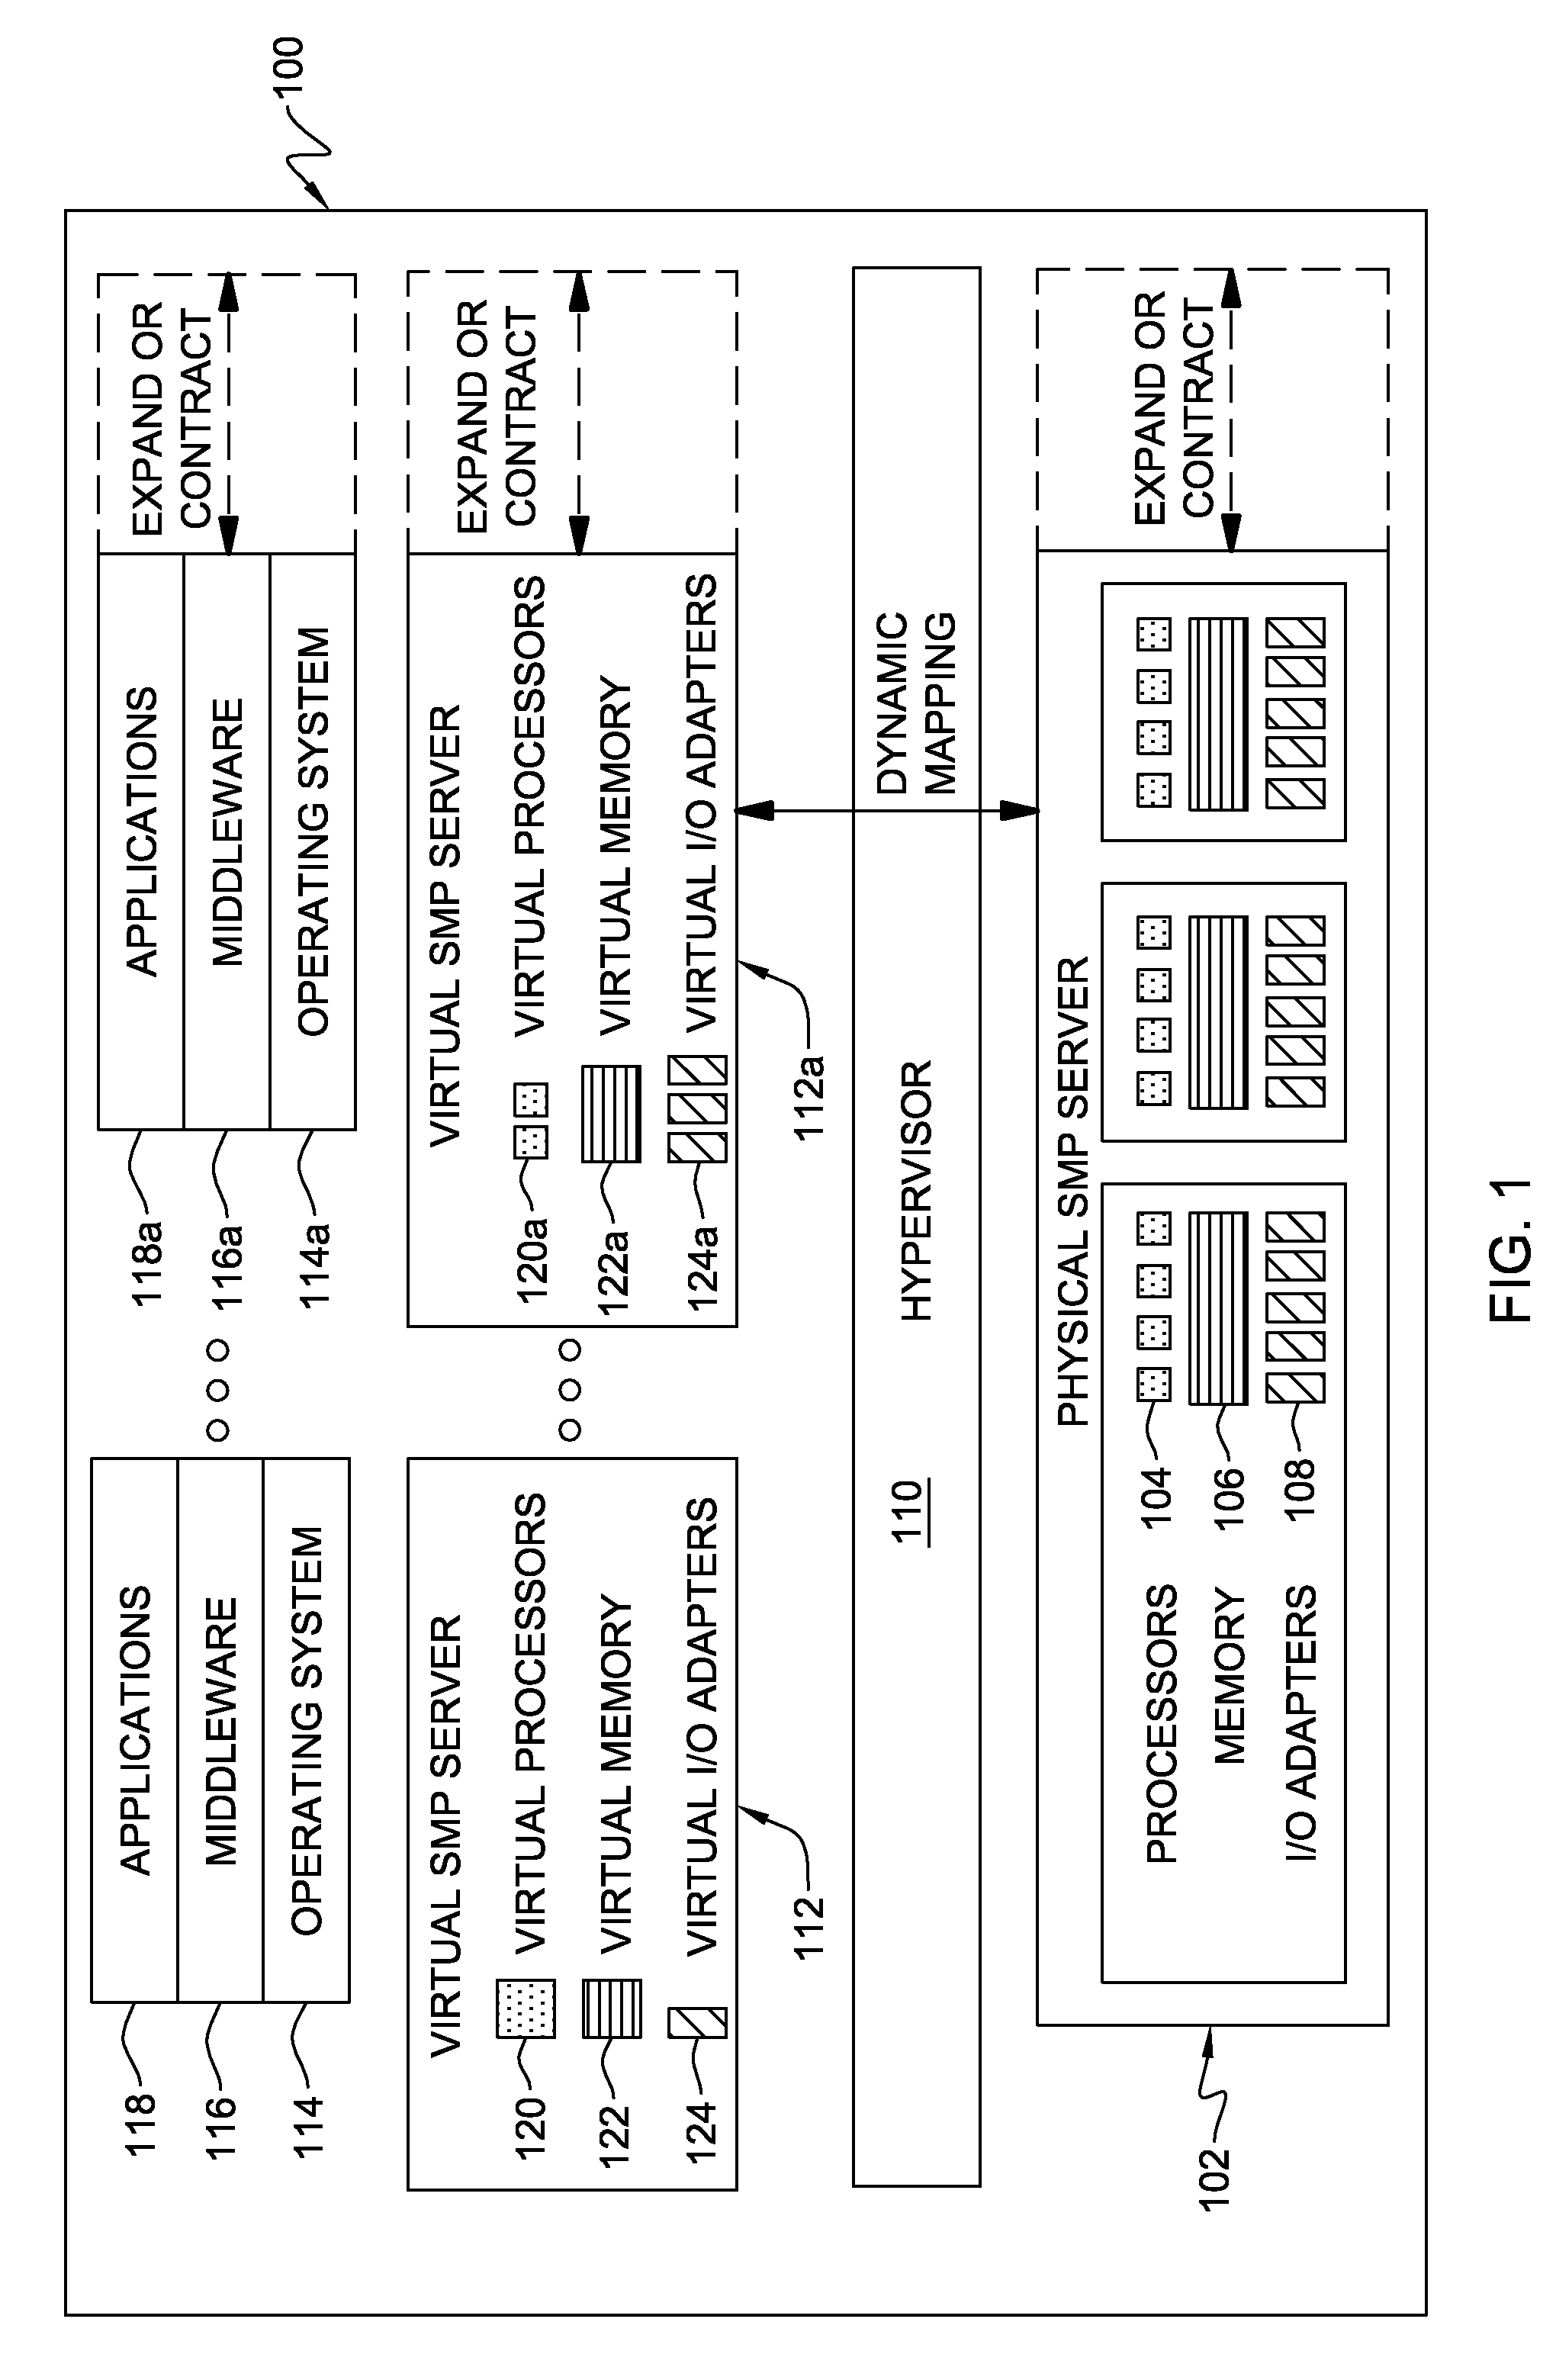 Shared Memory Partition Data Processing System With Hypervisor Managed Paging